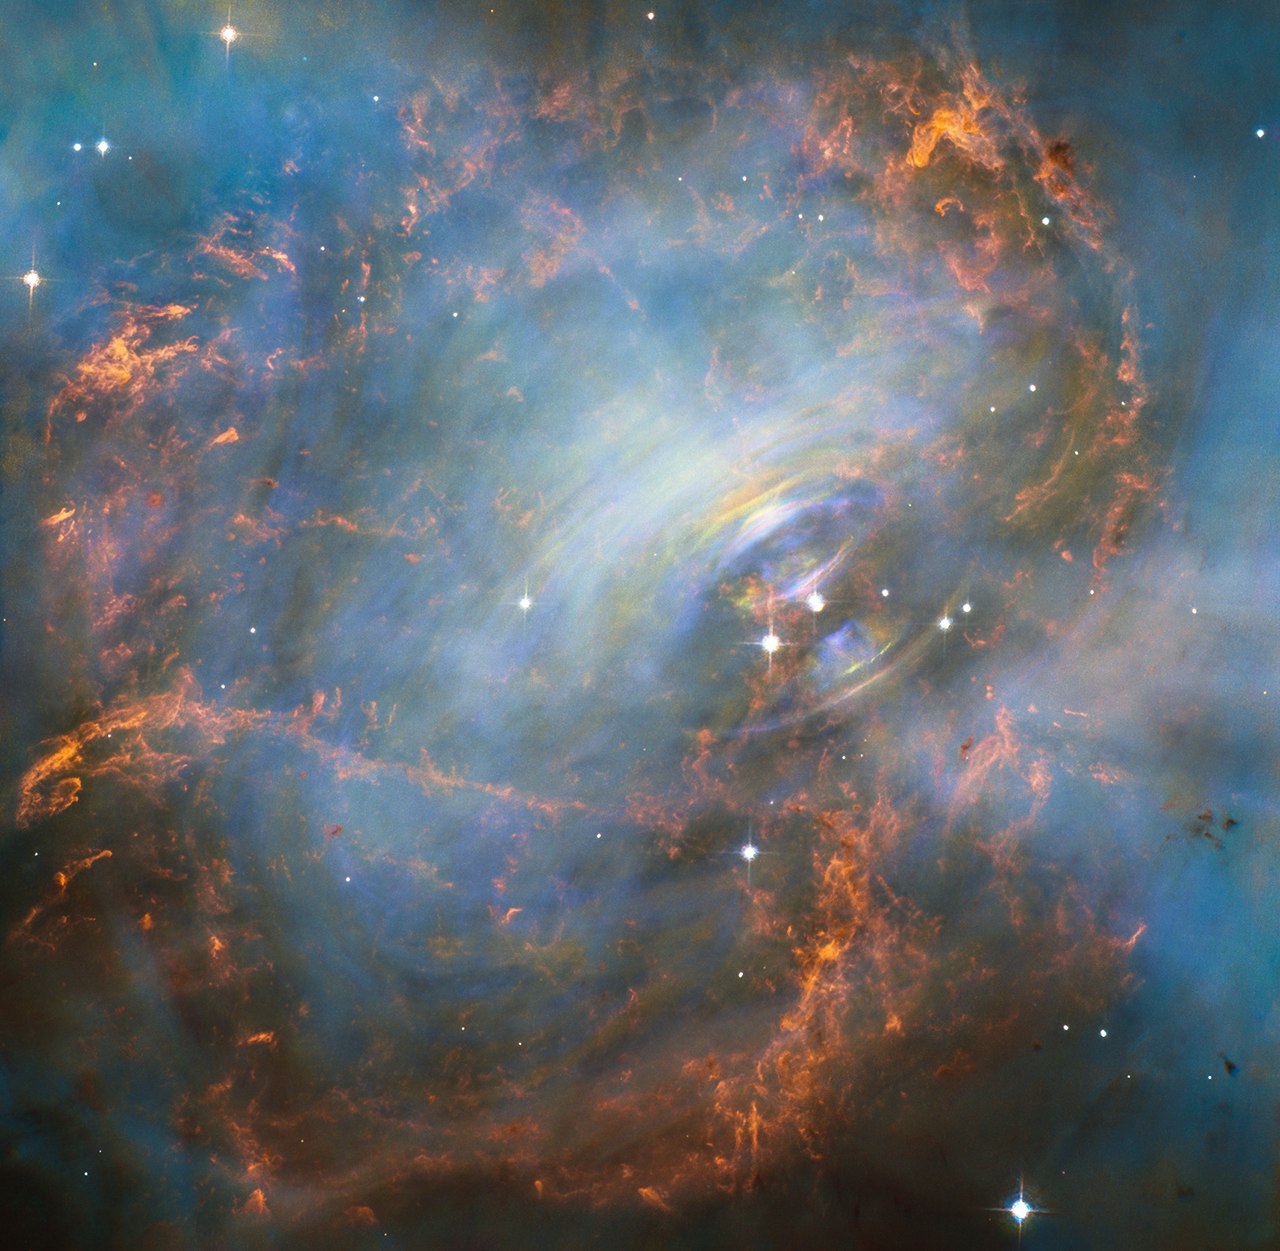 The pulsar at the center of the Crab Nebula, emitting wisps of high energy particles by the spinning of the star.